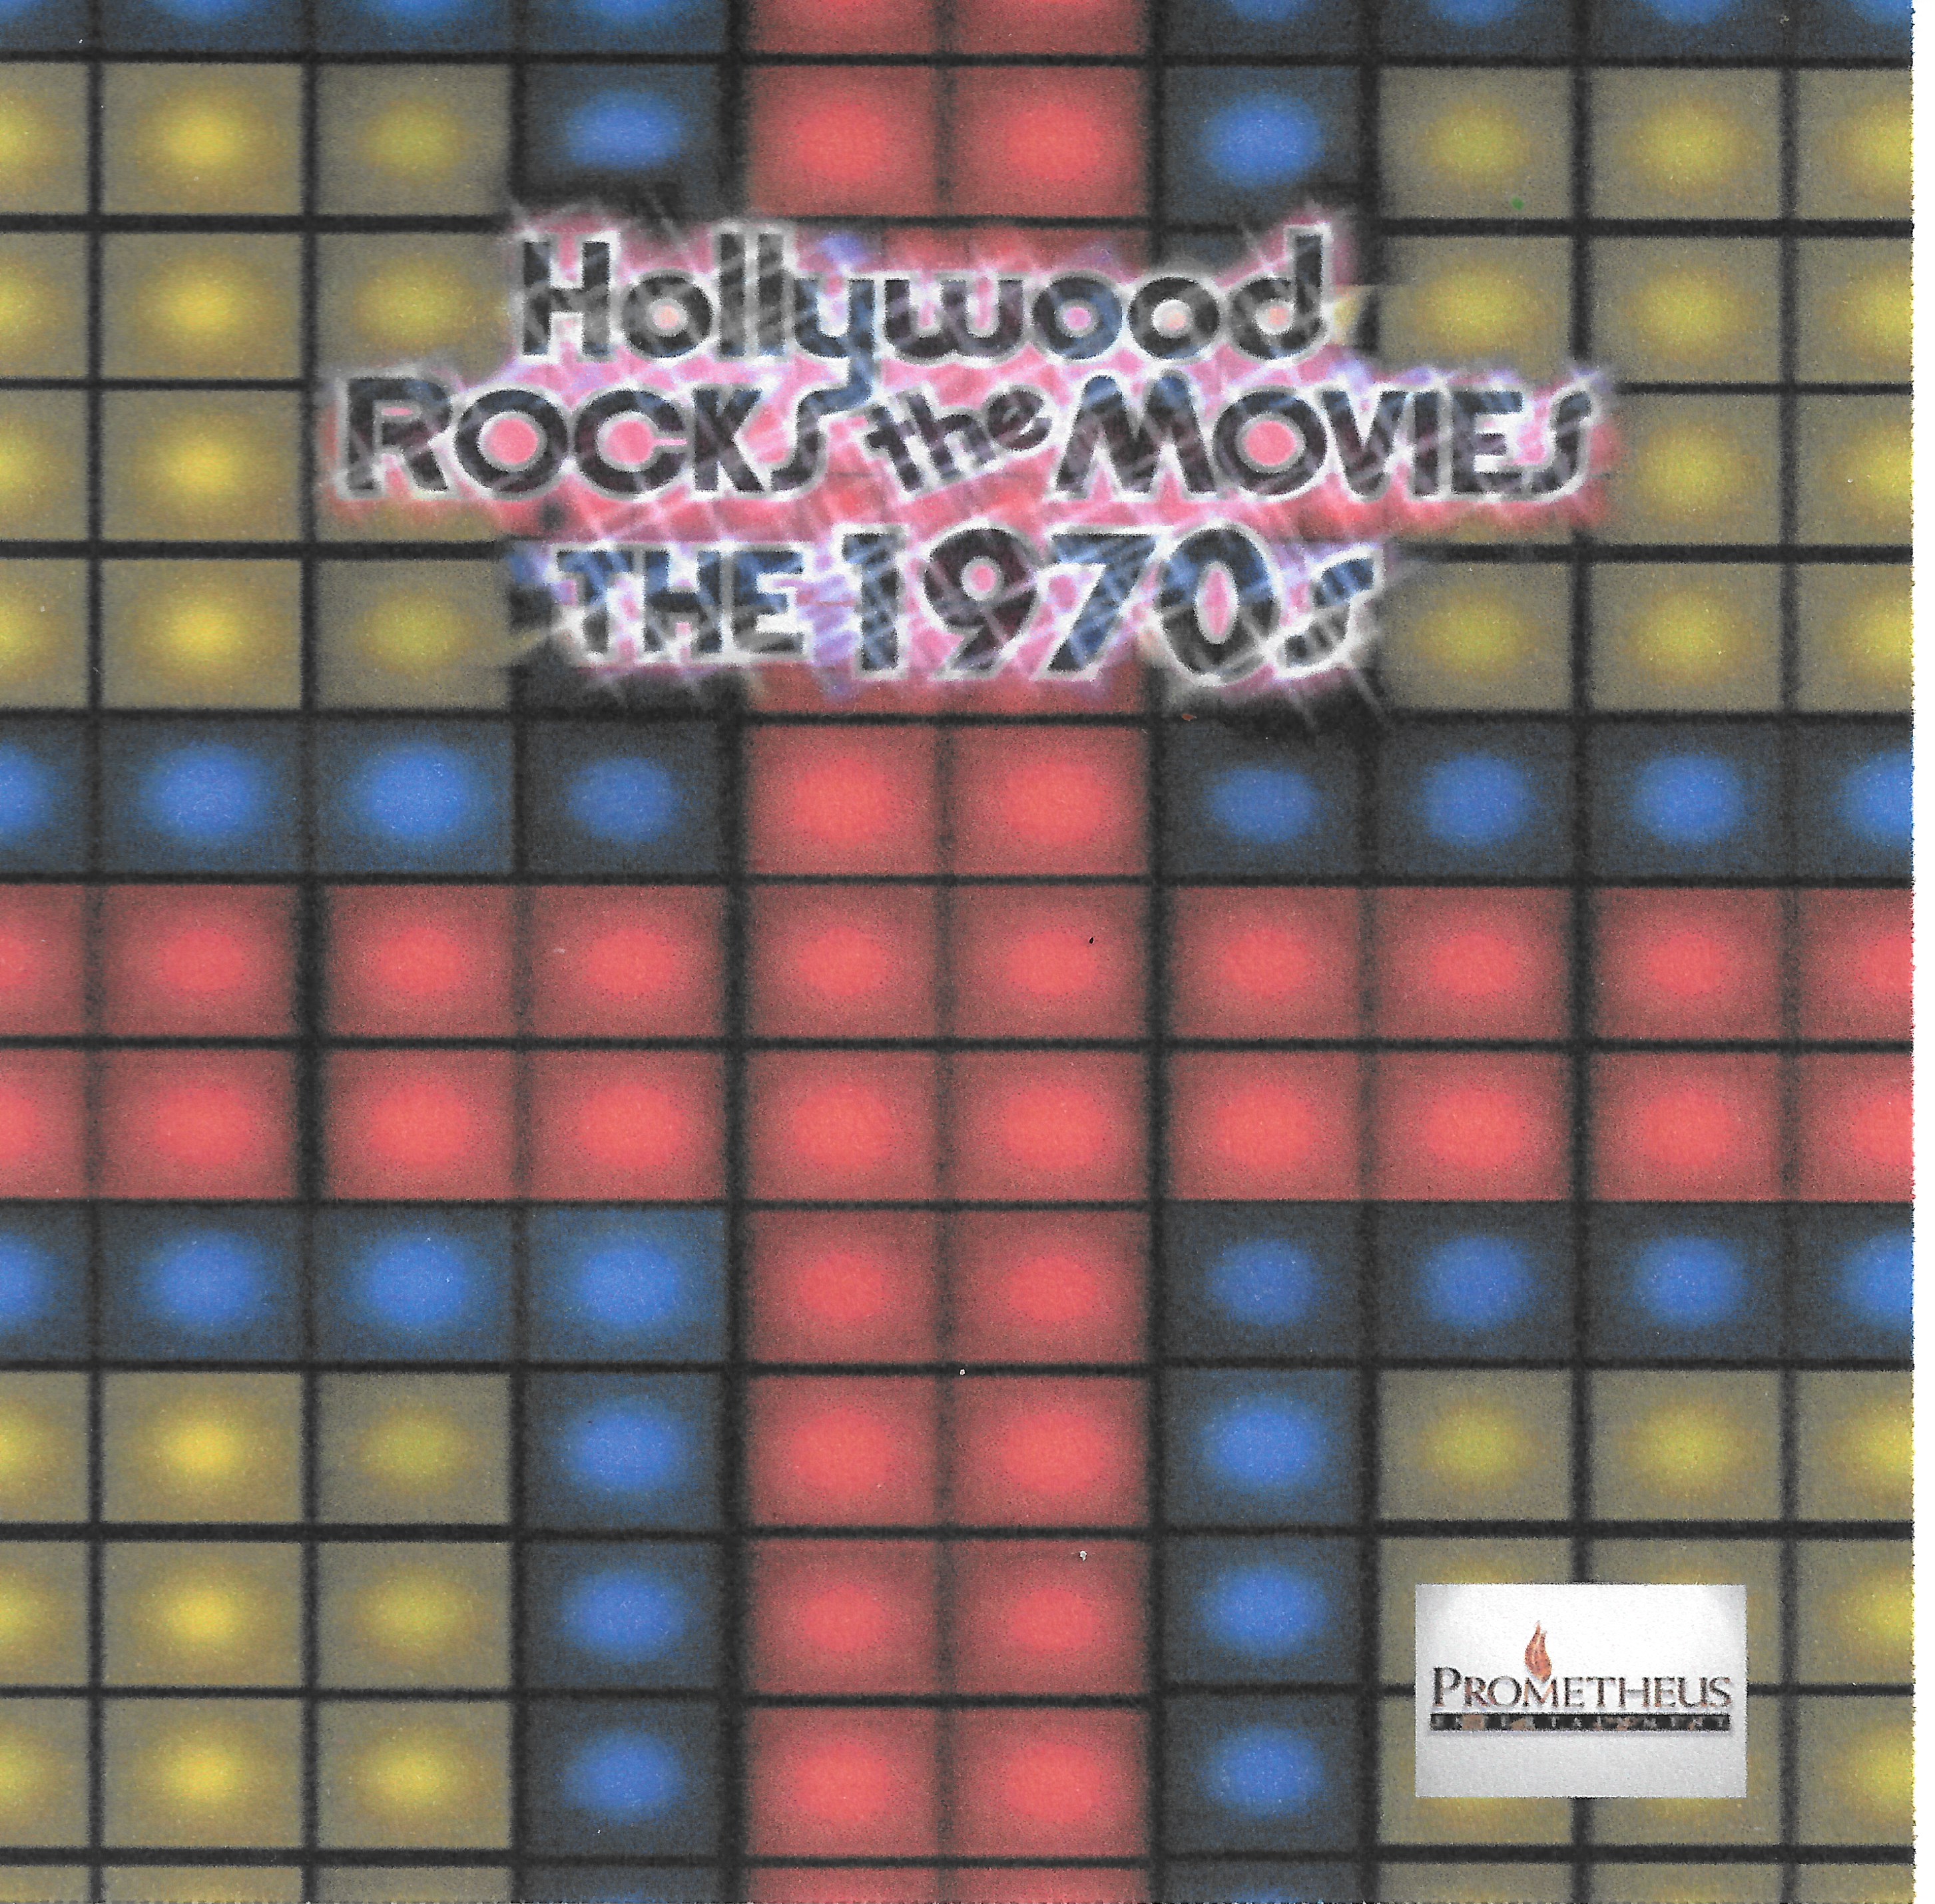 Hollywood Rocks the Movies: The 1970s (2002) Screenshot 1